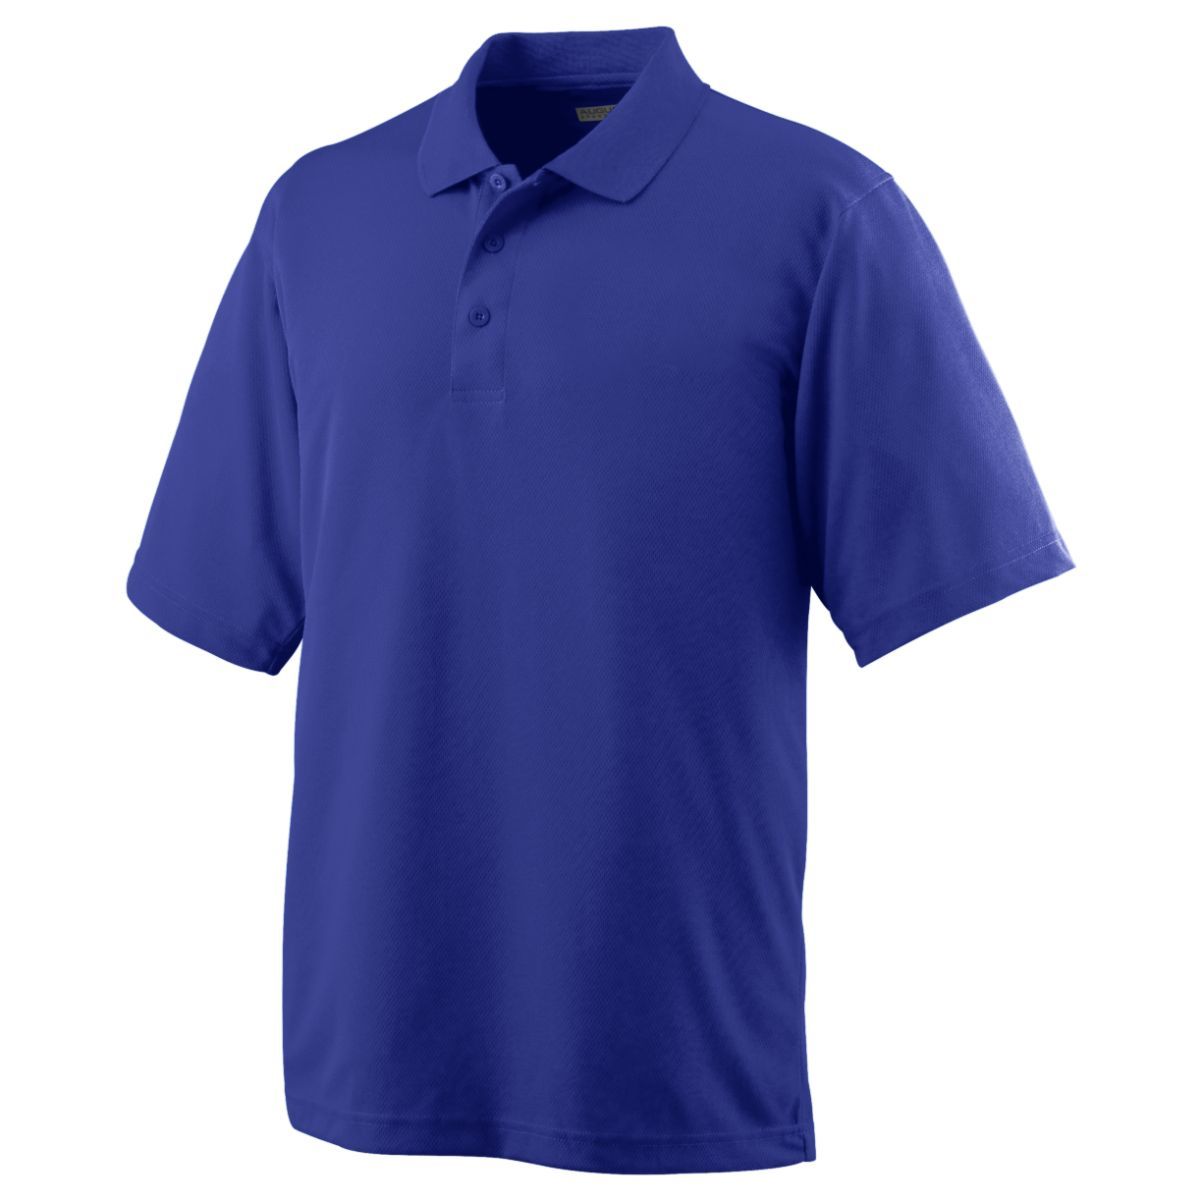 Augusta Sportswear Wicking Mesh Polo in Purple  -Part of the Adult, Adult-Polos, Polos, Augusta-Products, Tennis, Shirts product lines at KanaleyCreations.com